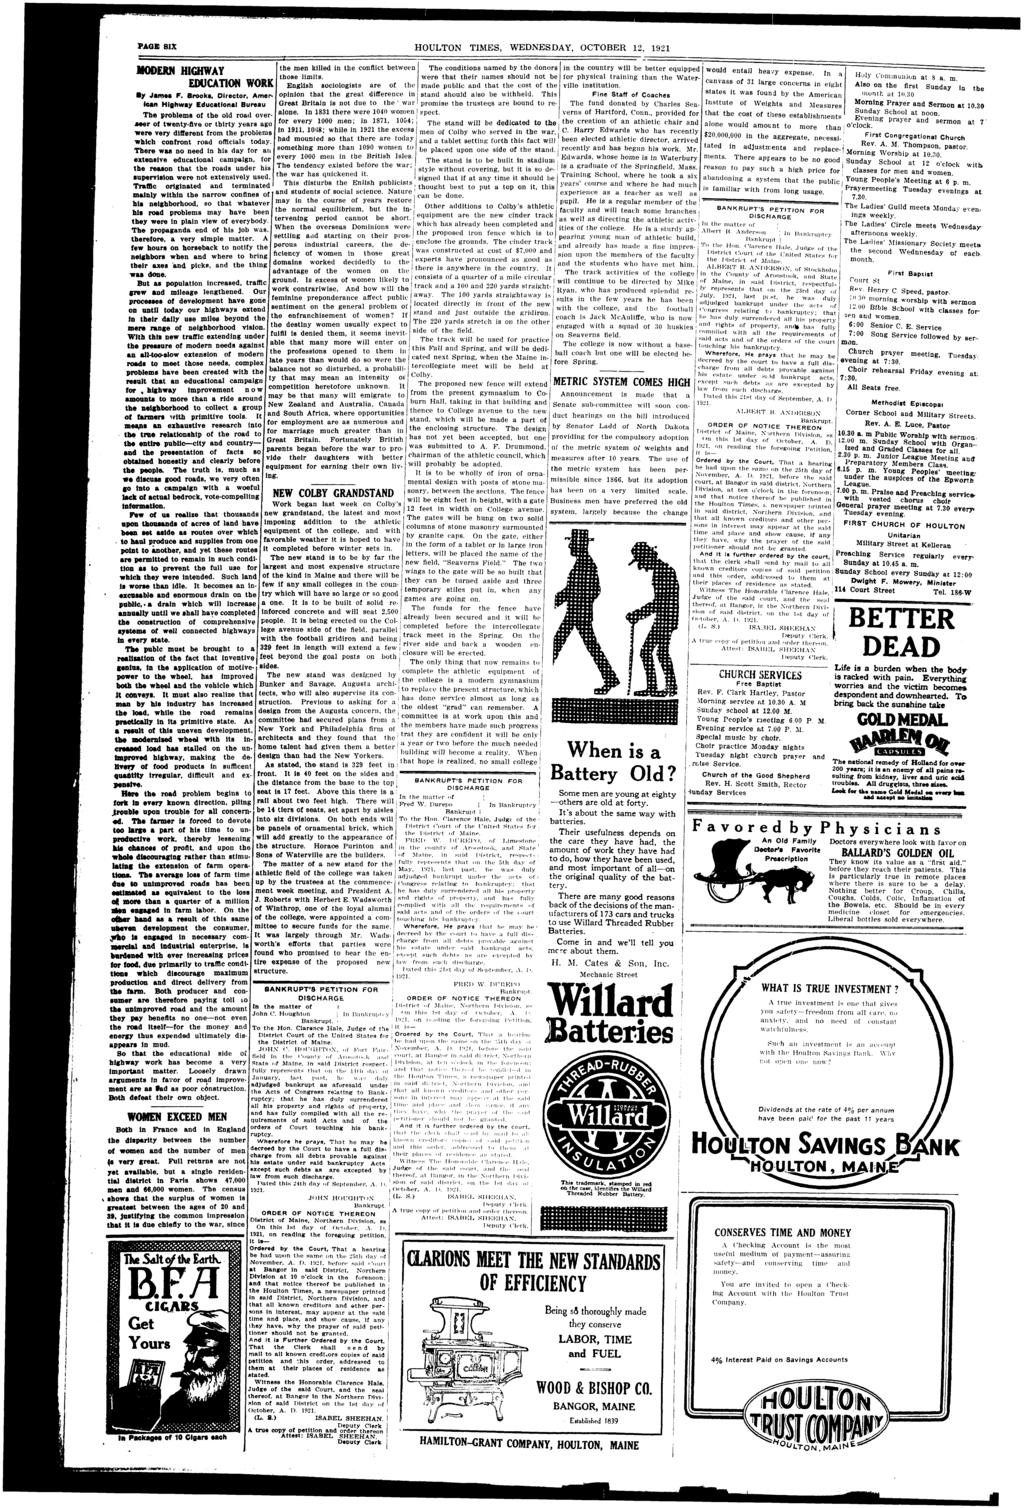 PAGE SIX HOULTON TIMES, WEDNESDAY, OCTOBER 12, 1921 modern hghway EDUCATION WORK By James F.